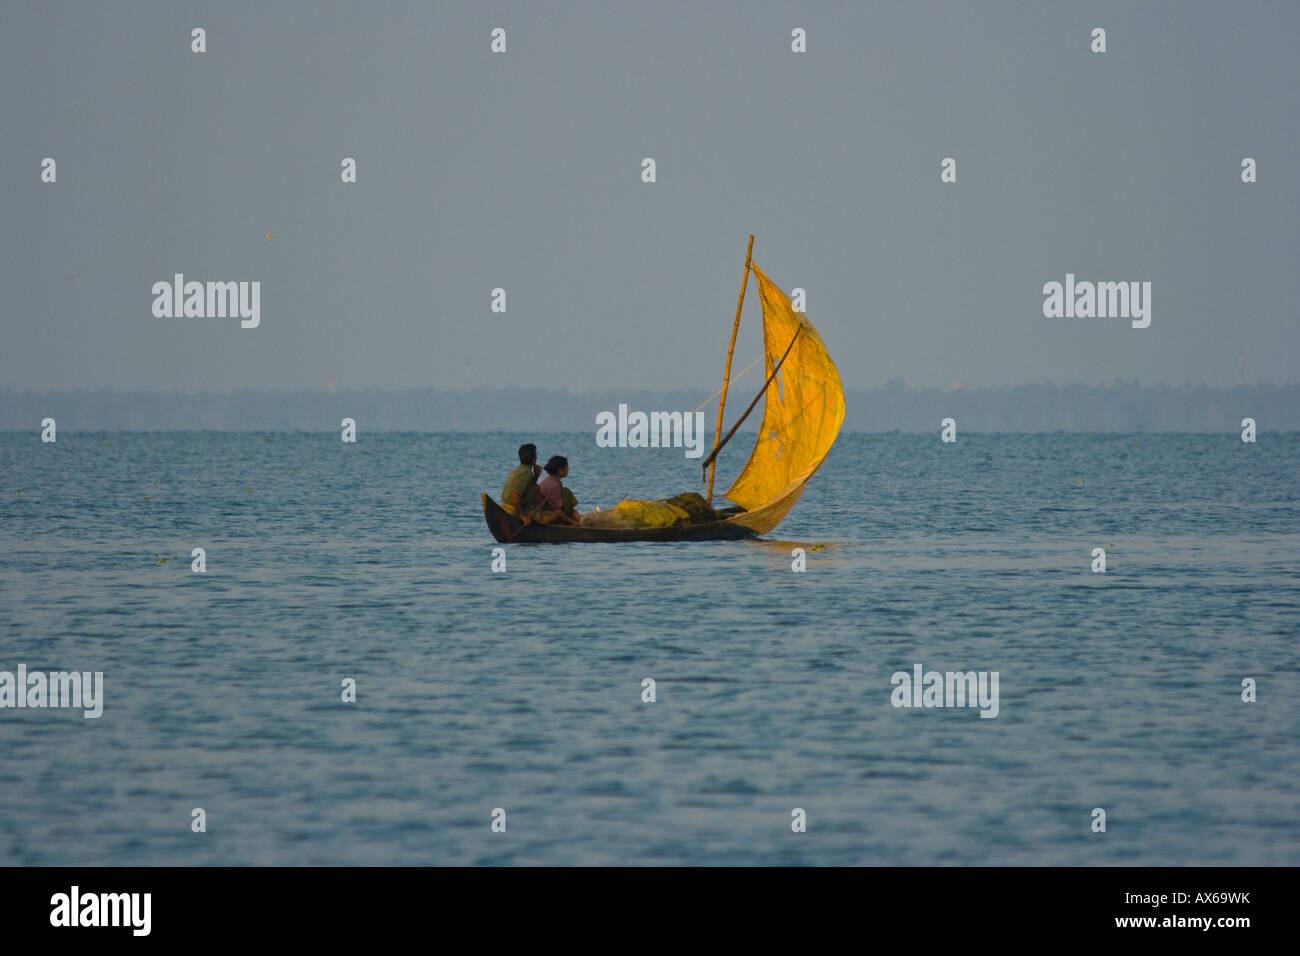 Small Sailboat in the Keralan Backwaters in India Stock Photo